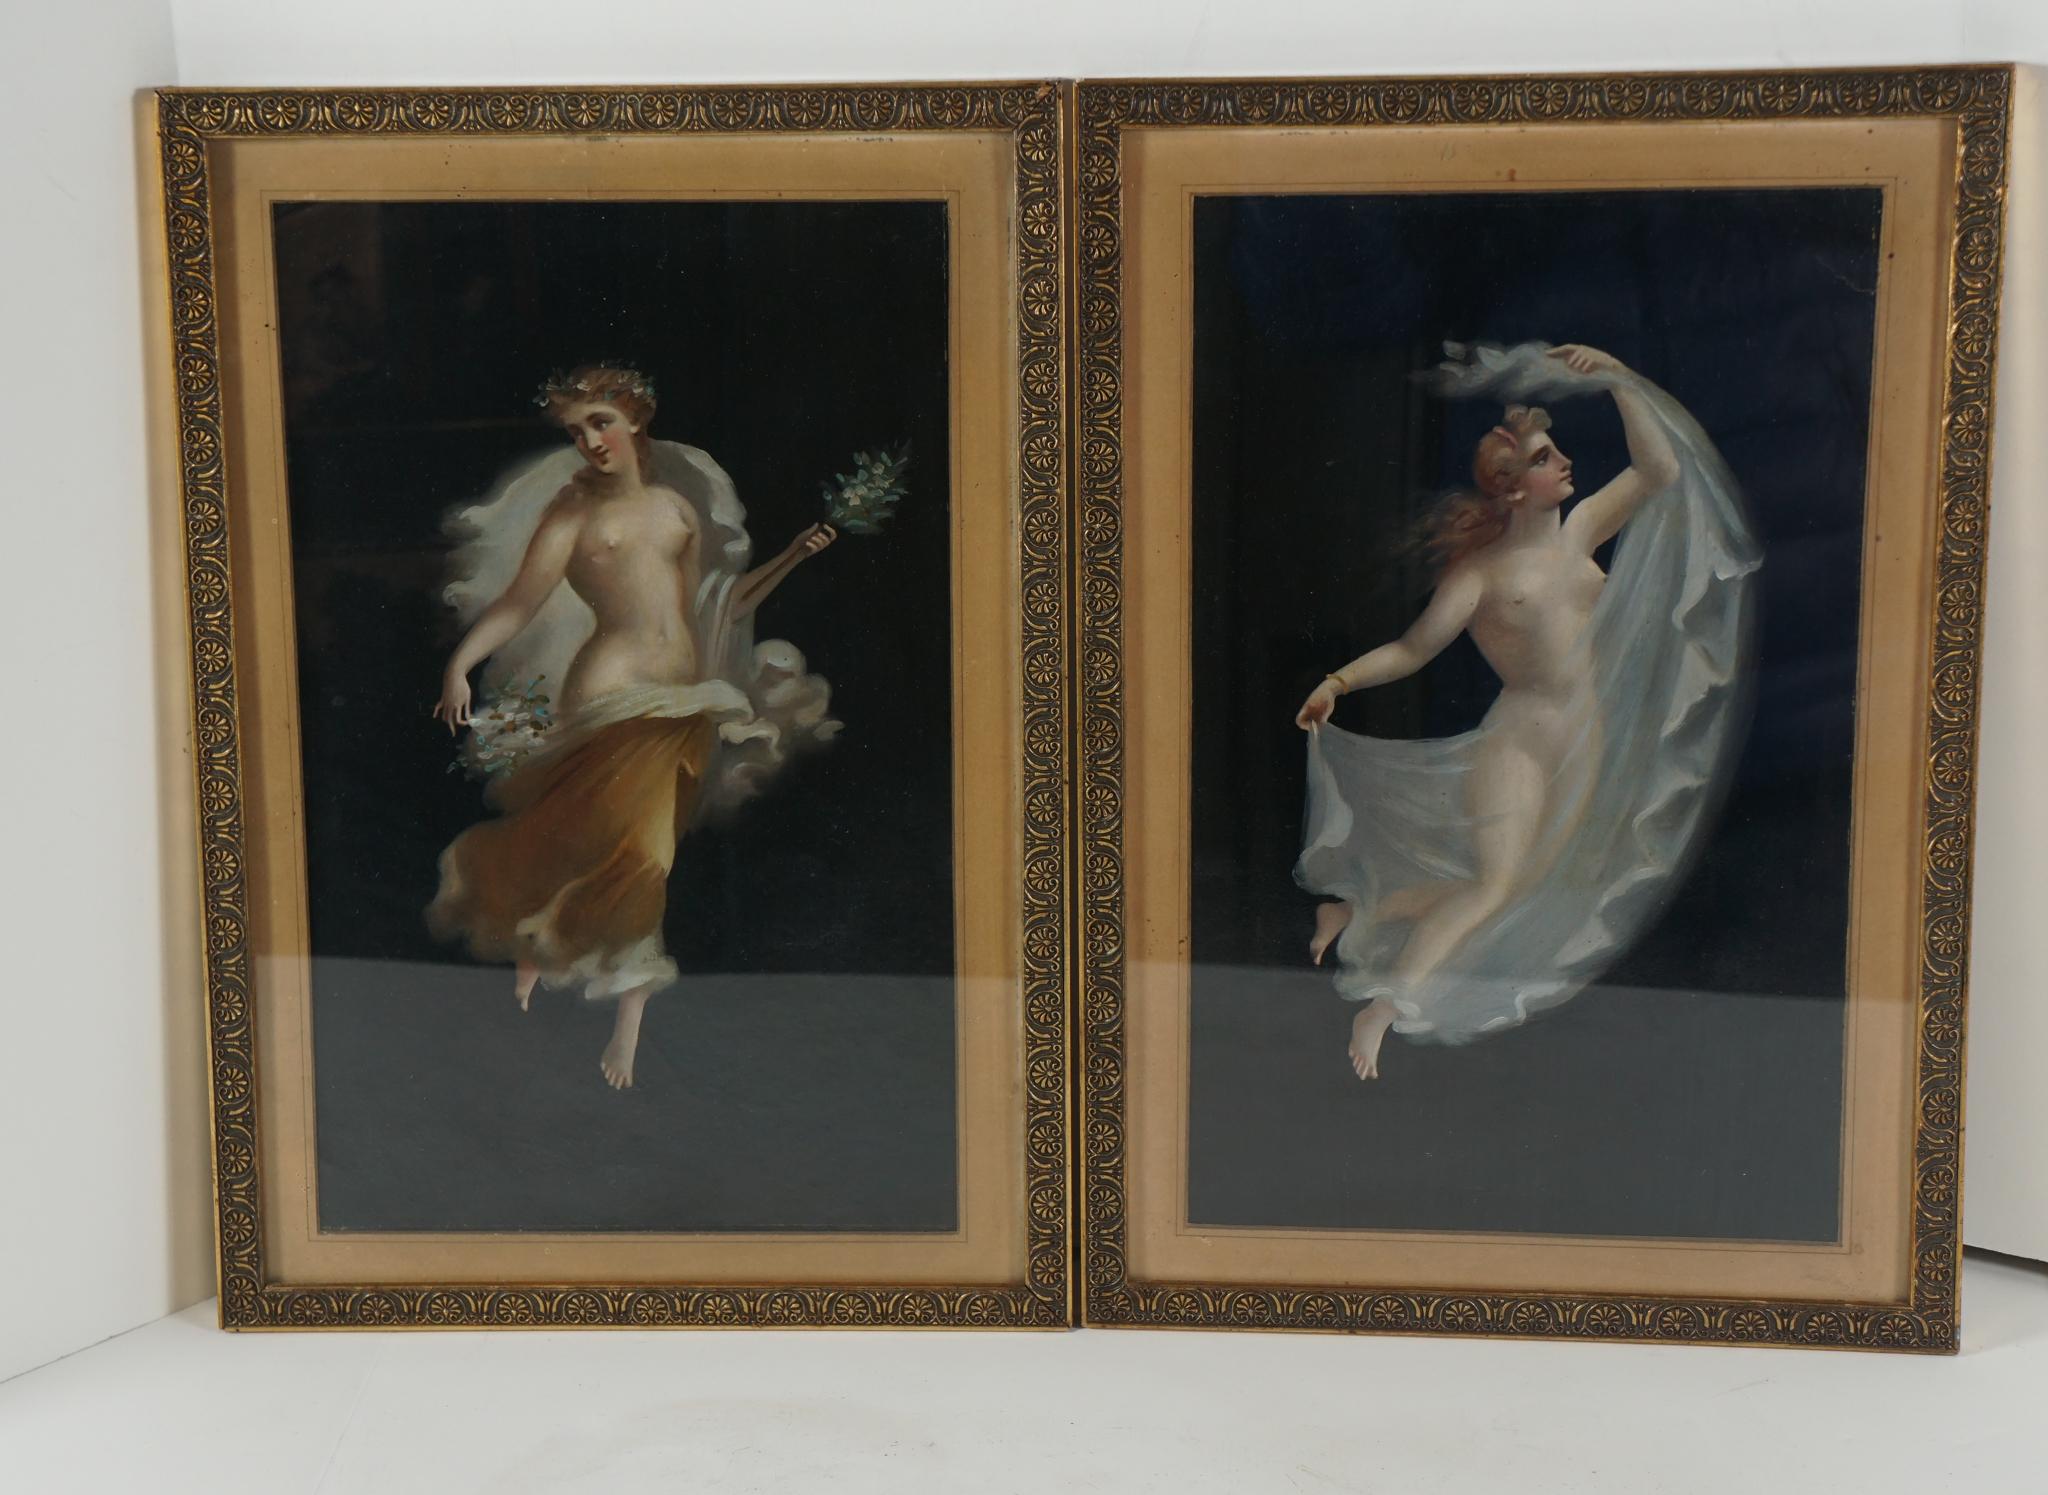 These two paintings, considered tourist art produced in Naples Italy in the late 19th century, are reinterpretations of the frescos found in the excavations of Pompei. The painting is light and delicate, typical of Roman imperial works done as